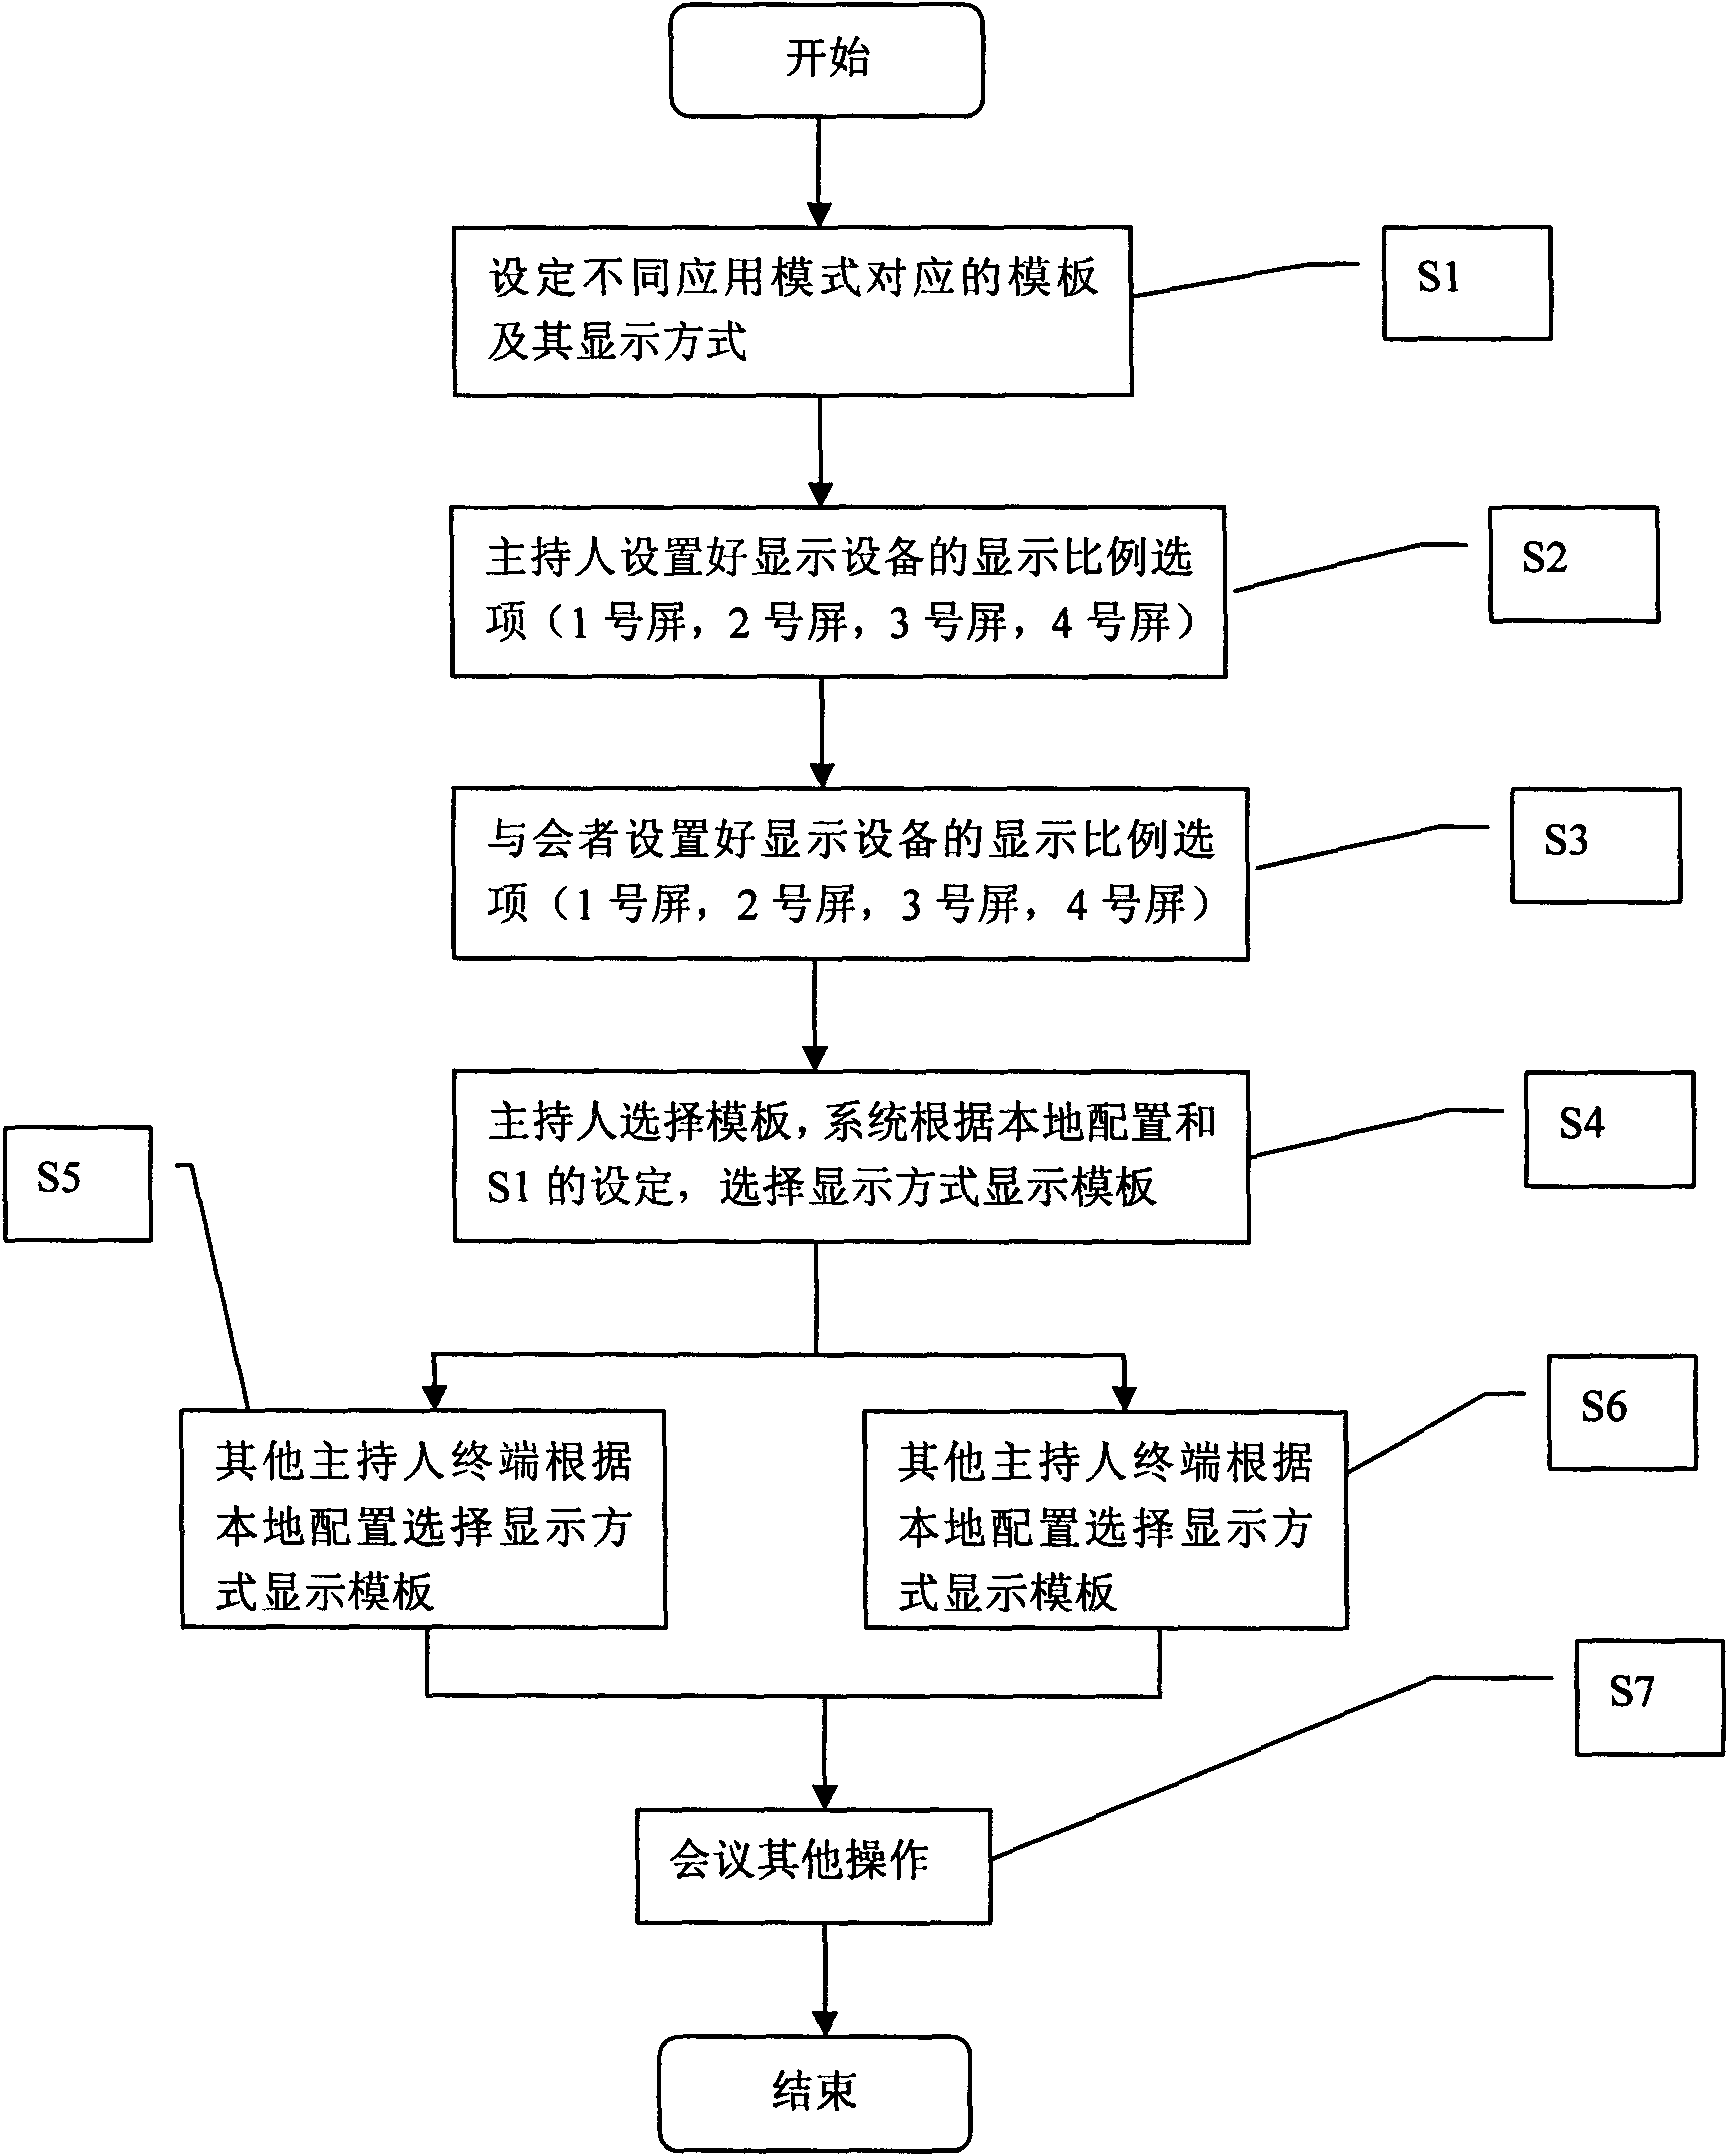 Template display method in video conference system